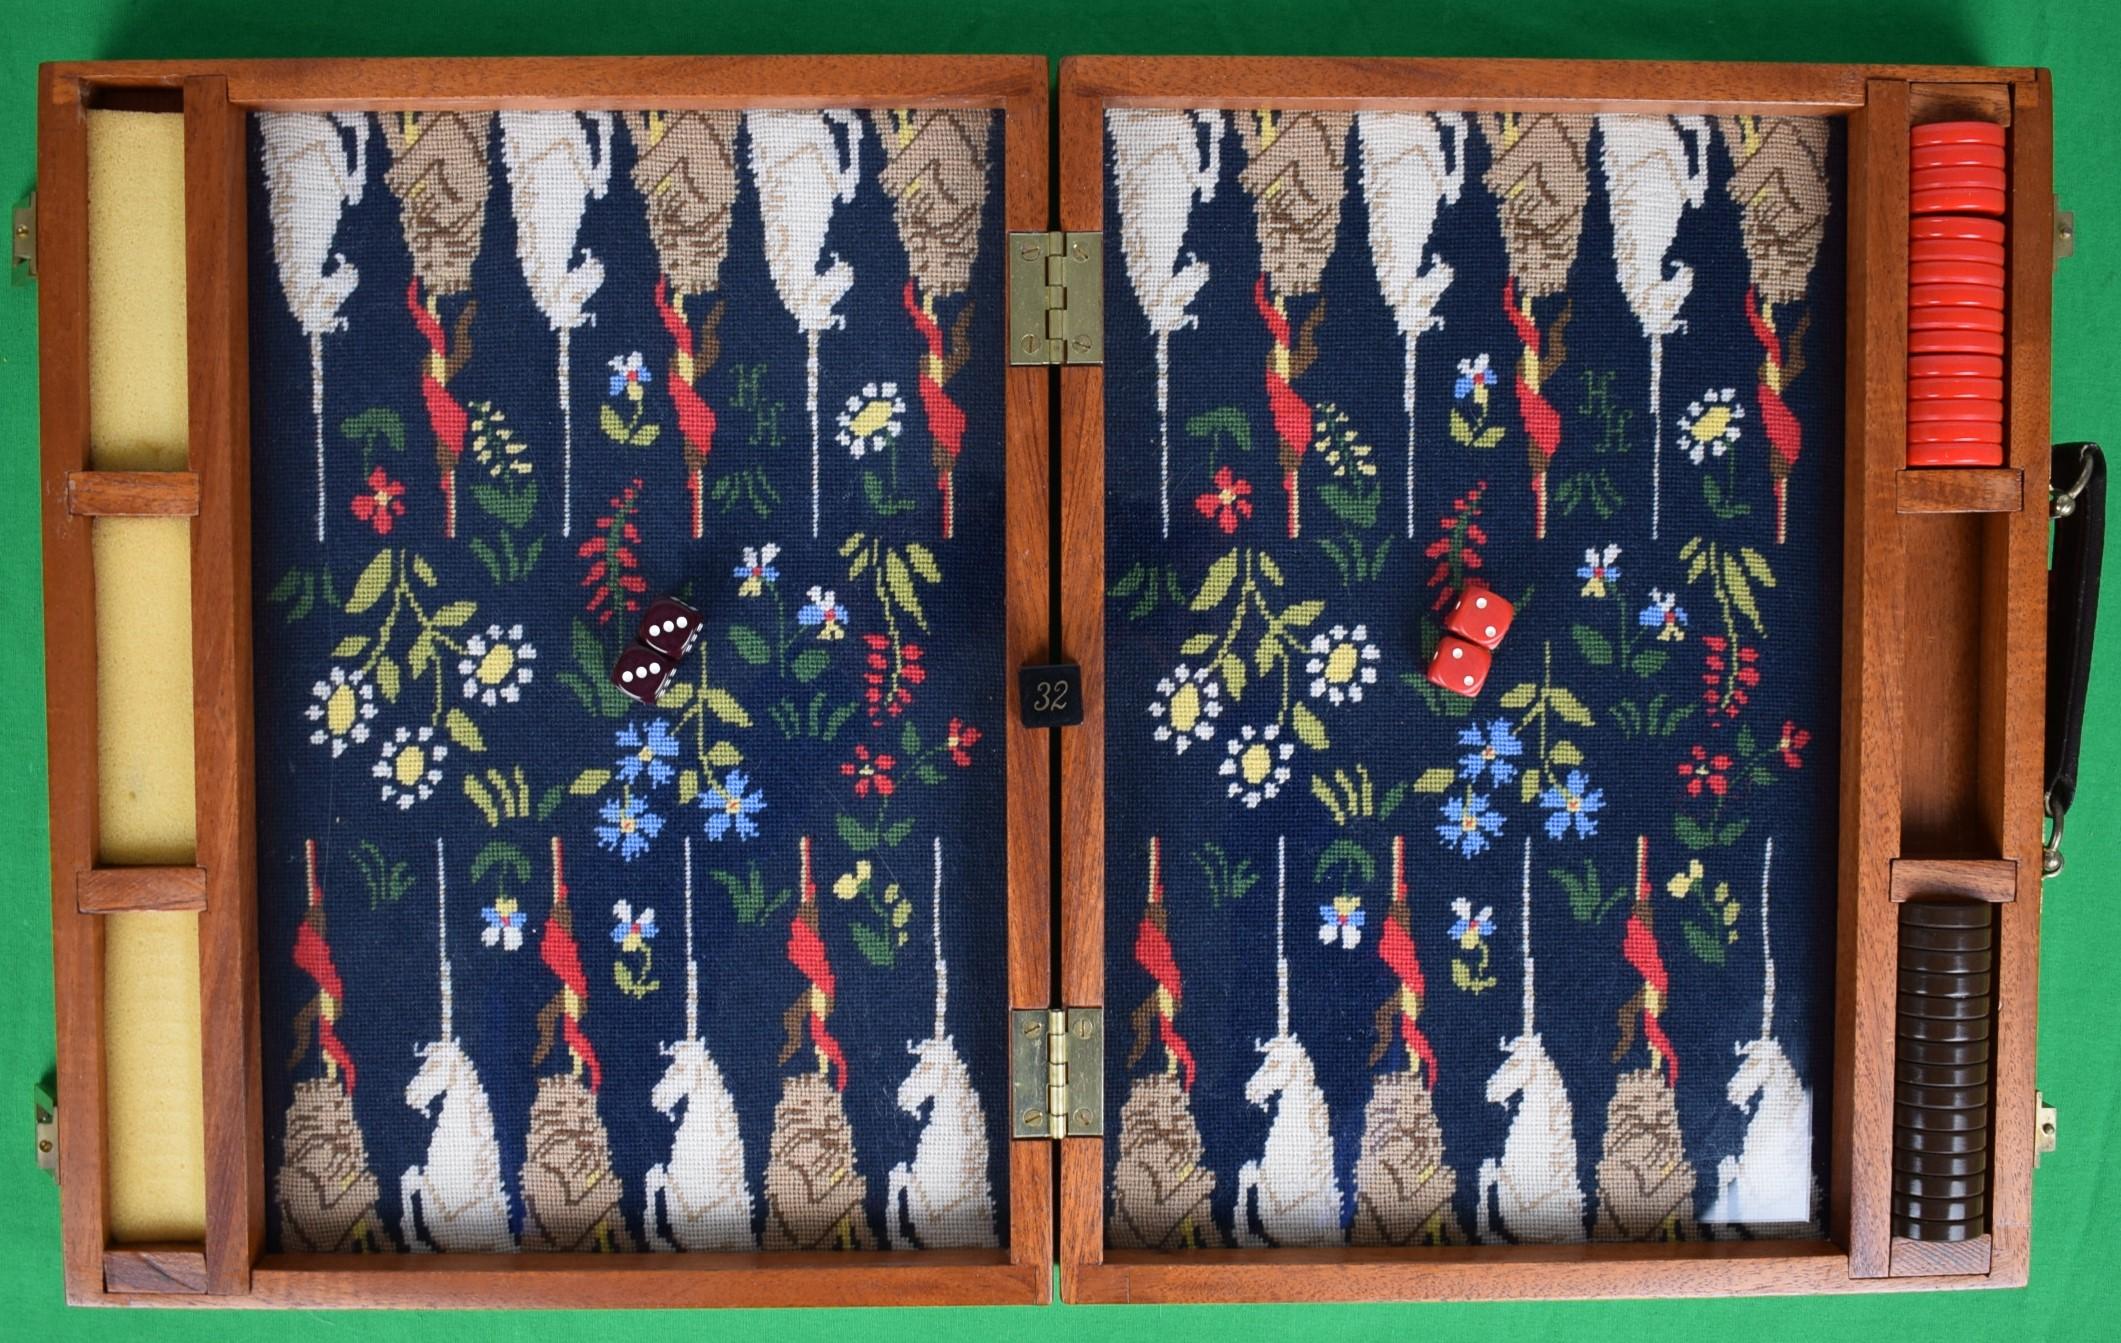 Hand-Needlepoint Unicorn Backgammon Case w/ Red/ Brown Checkers - Art by Unknown